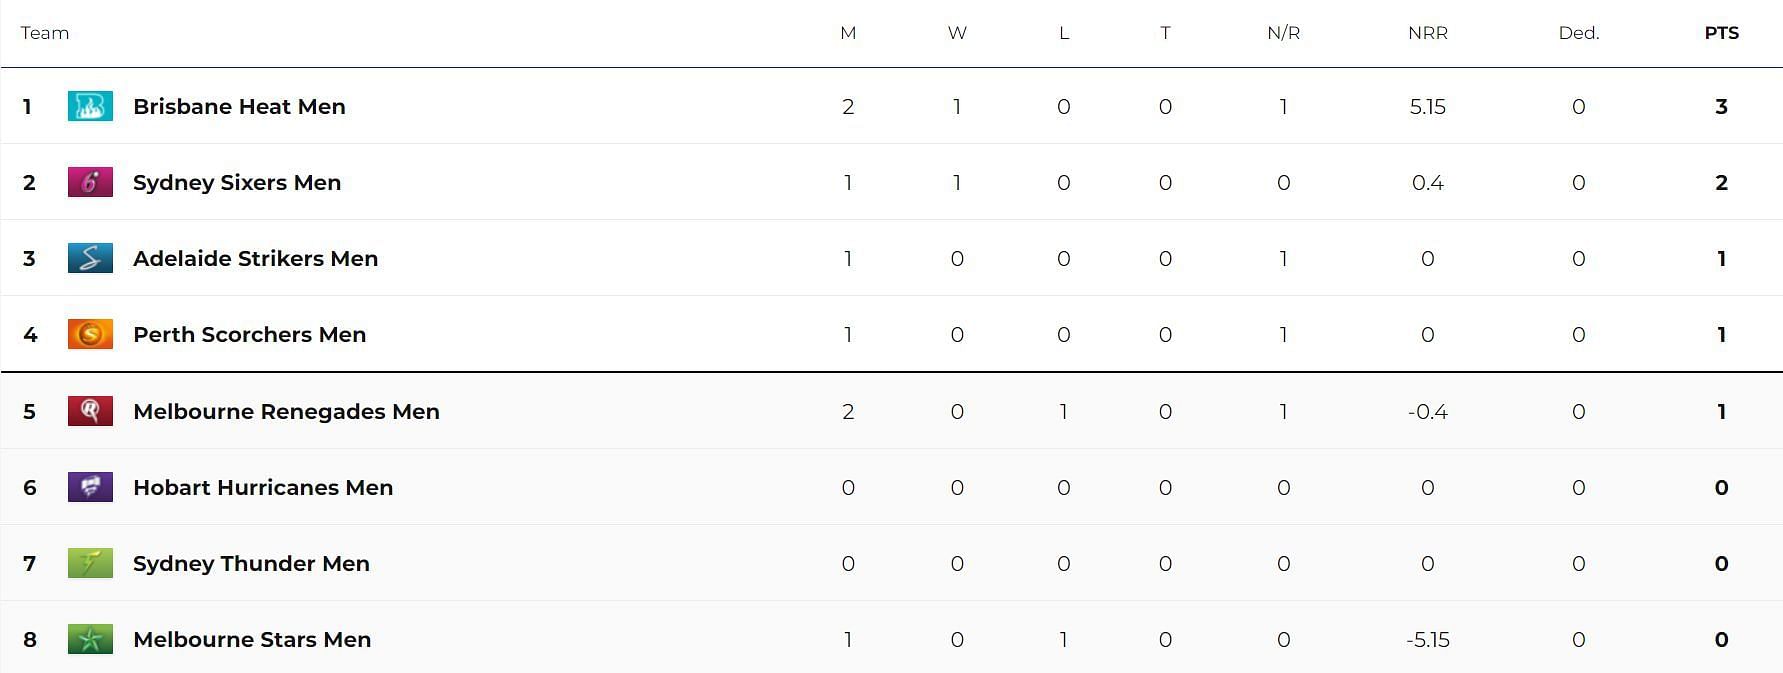 Updated Points Table after Match 4 (Image Courtesy: cricket.com.au)